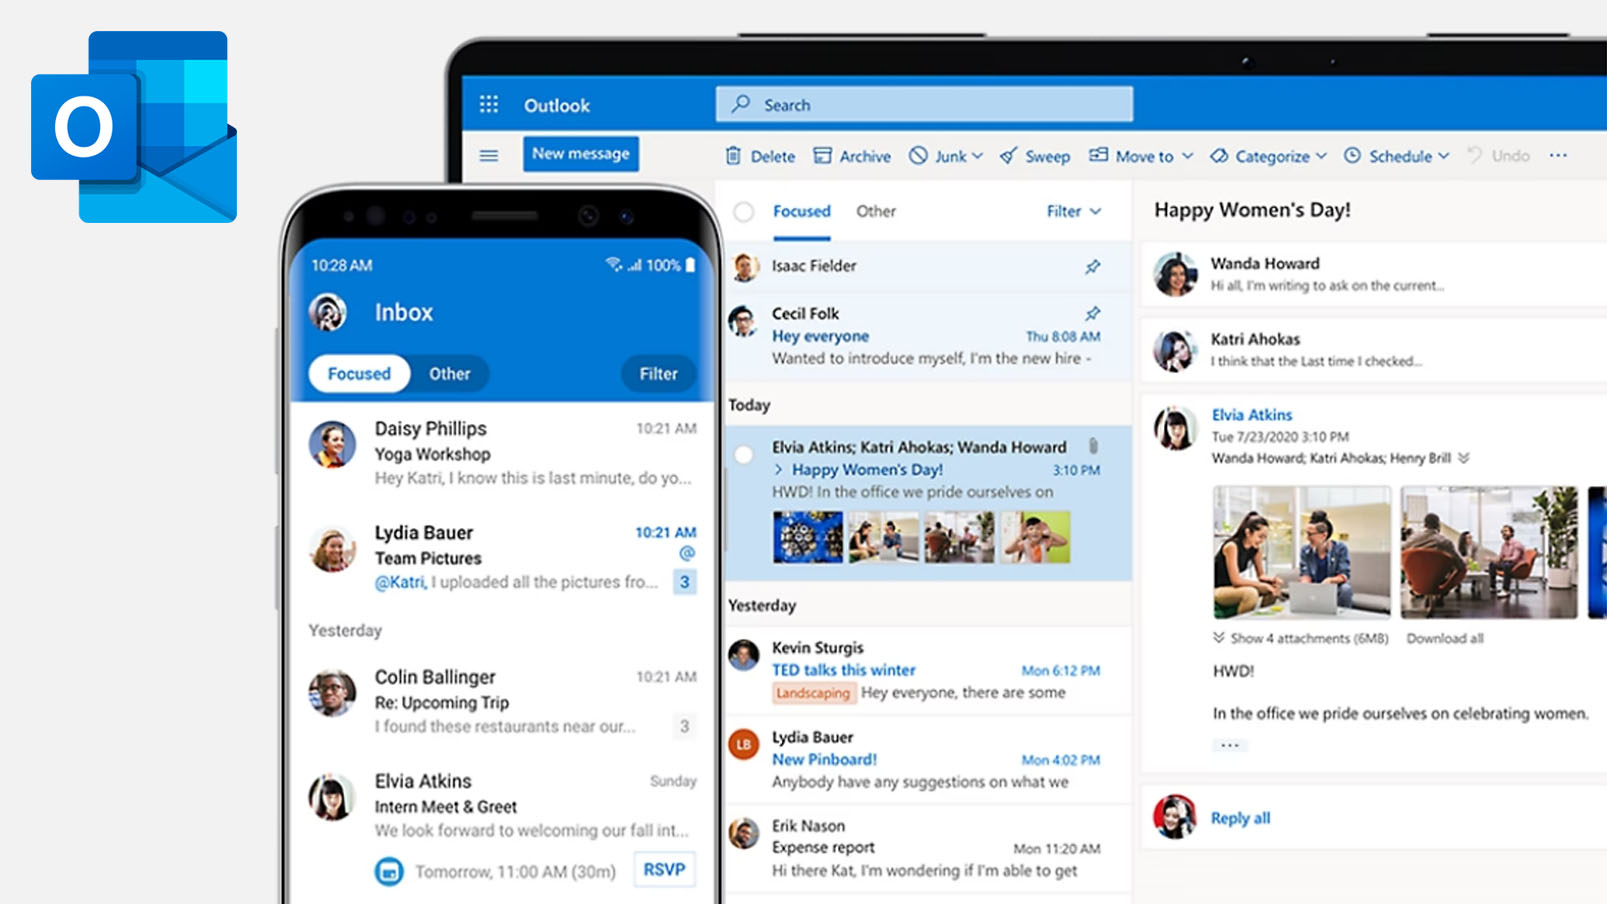 Web-based Outlook rolling out soon